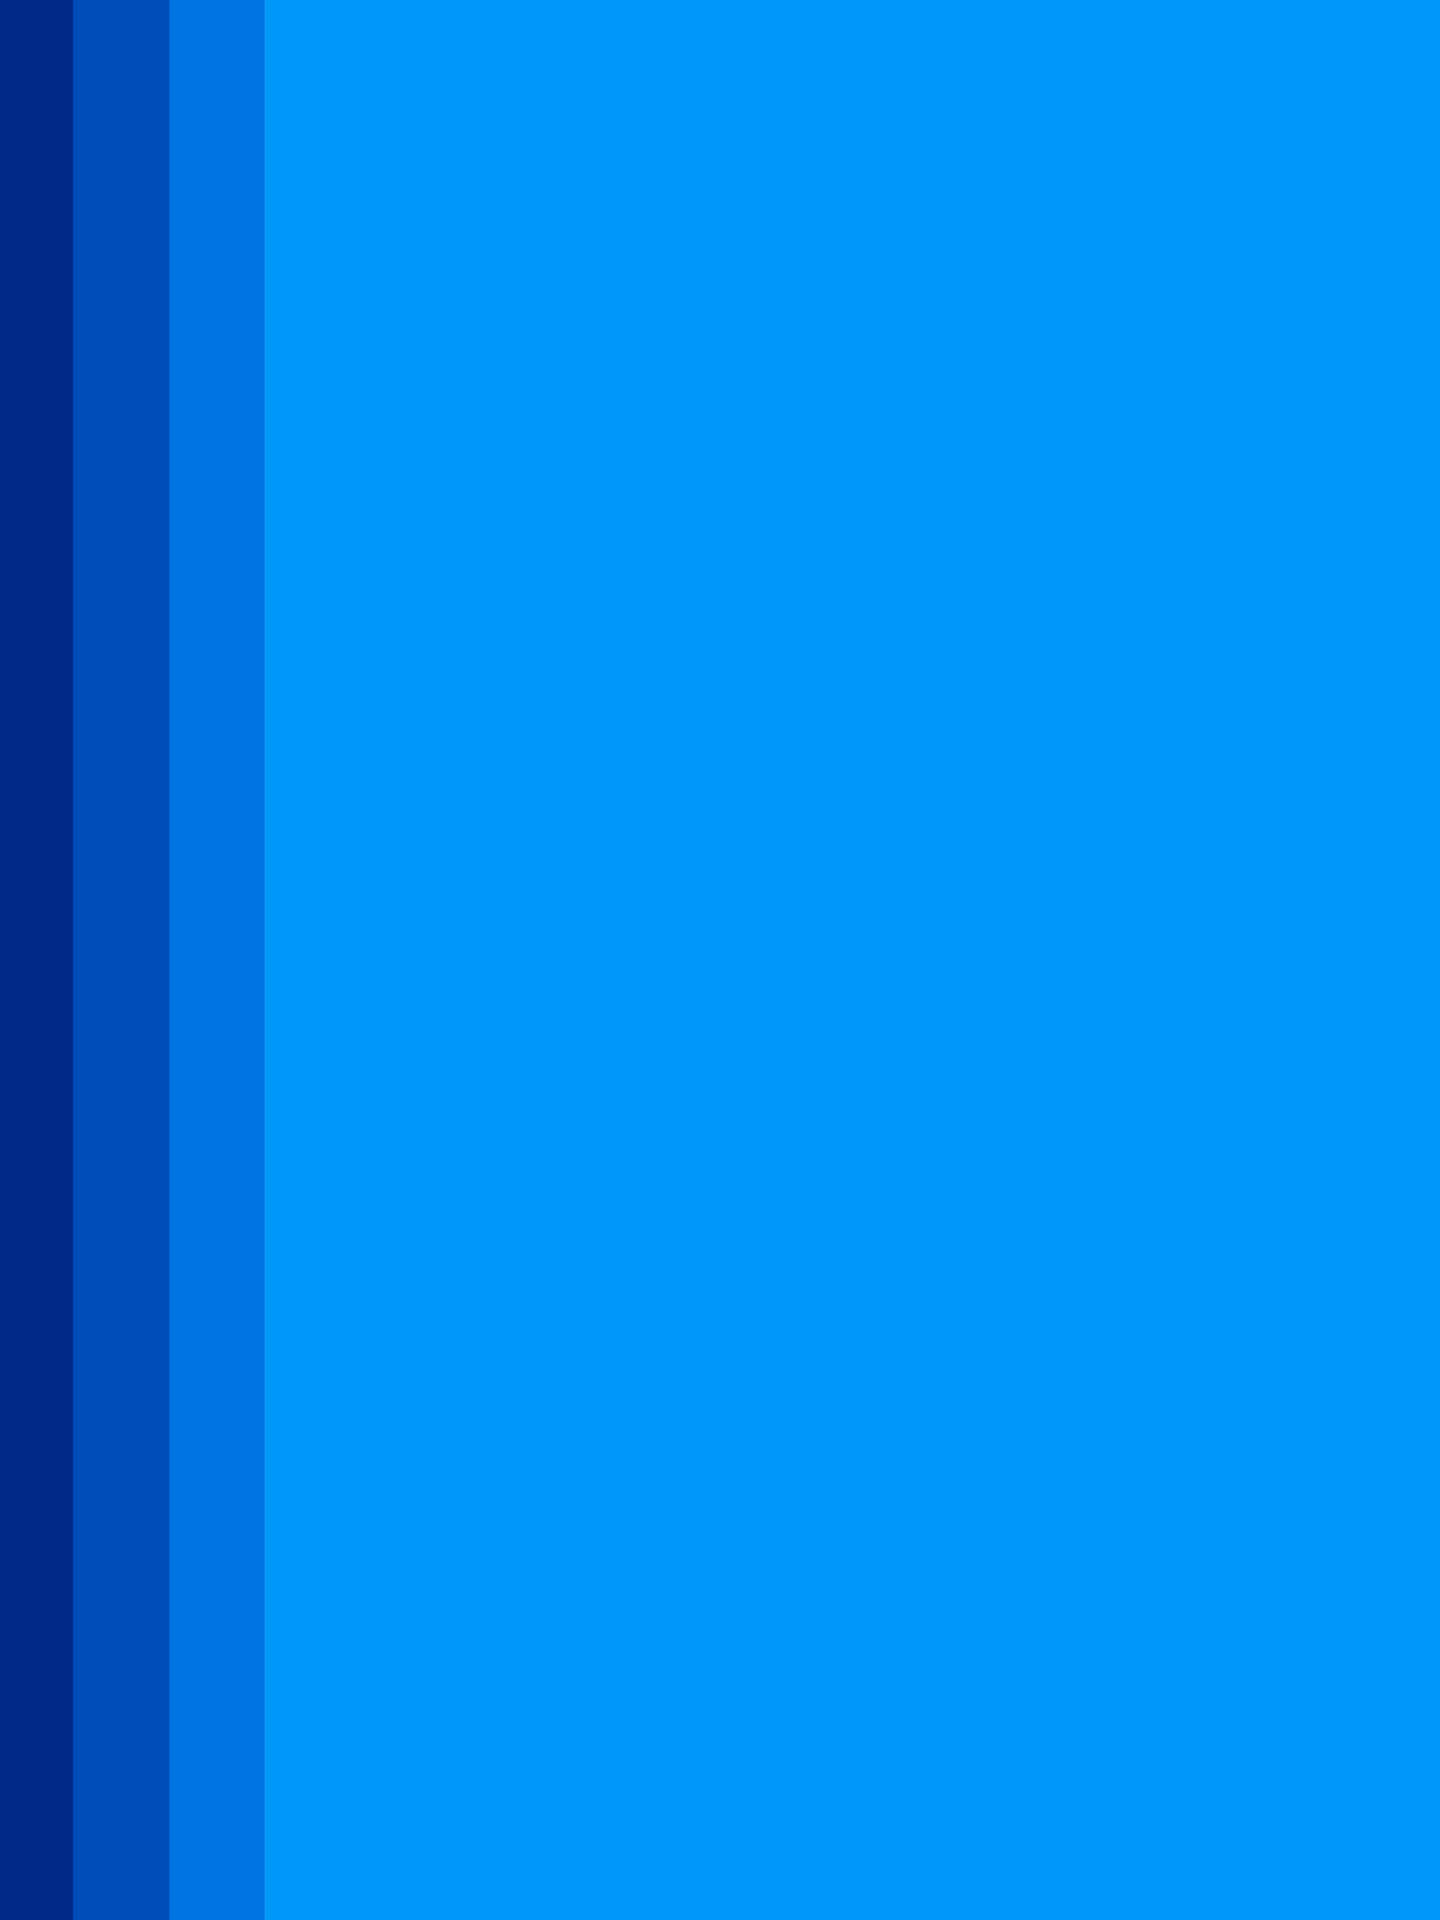 Solid Blue With Stripe Background